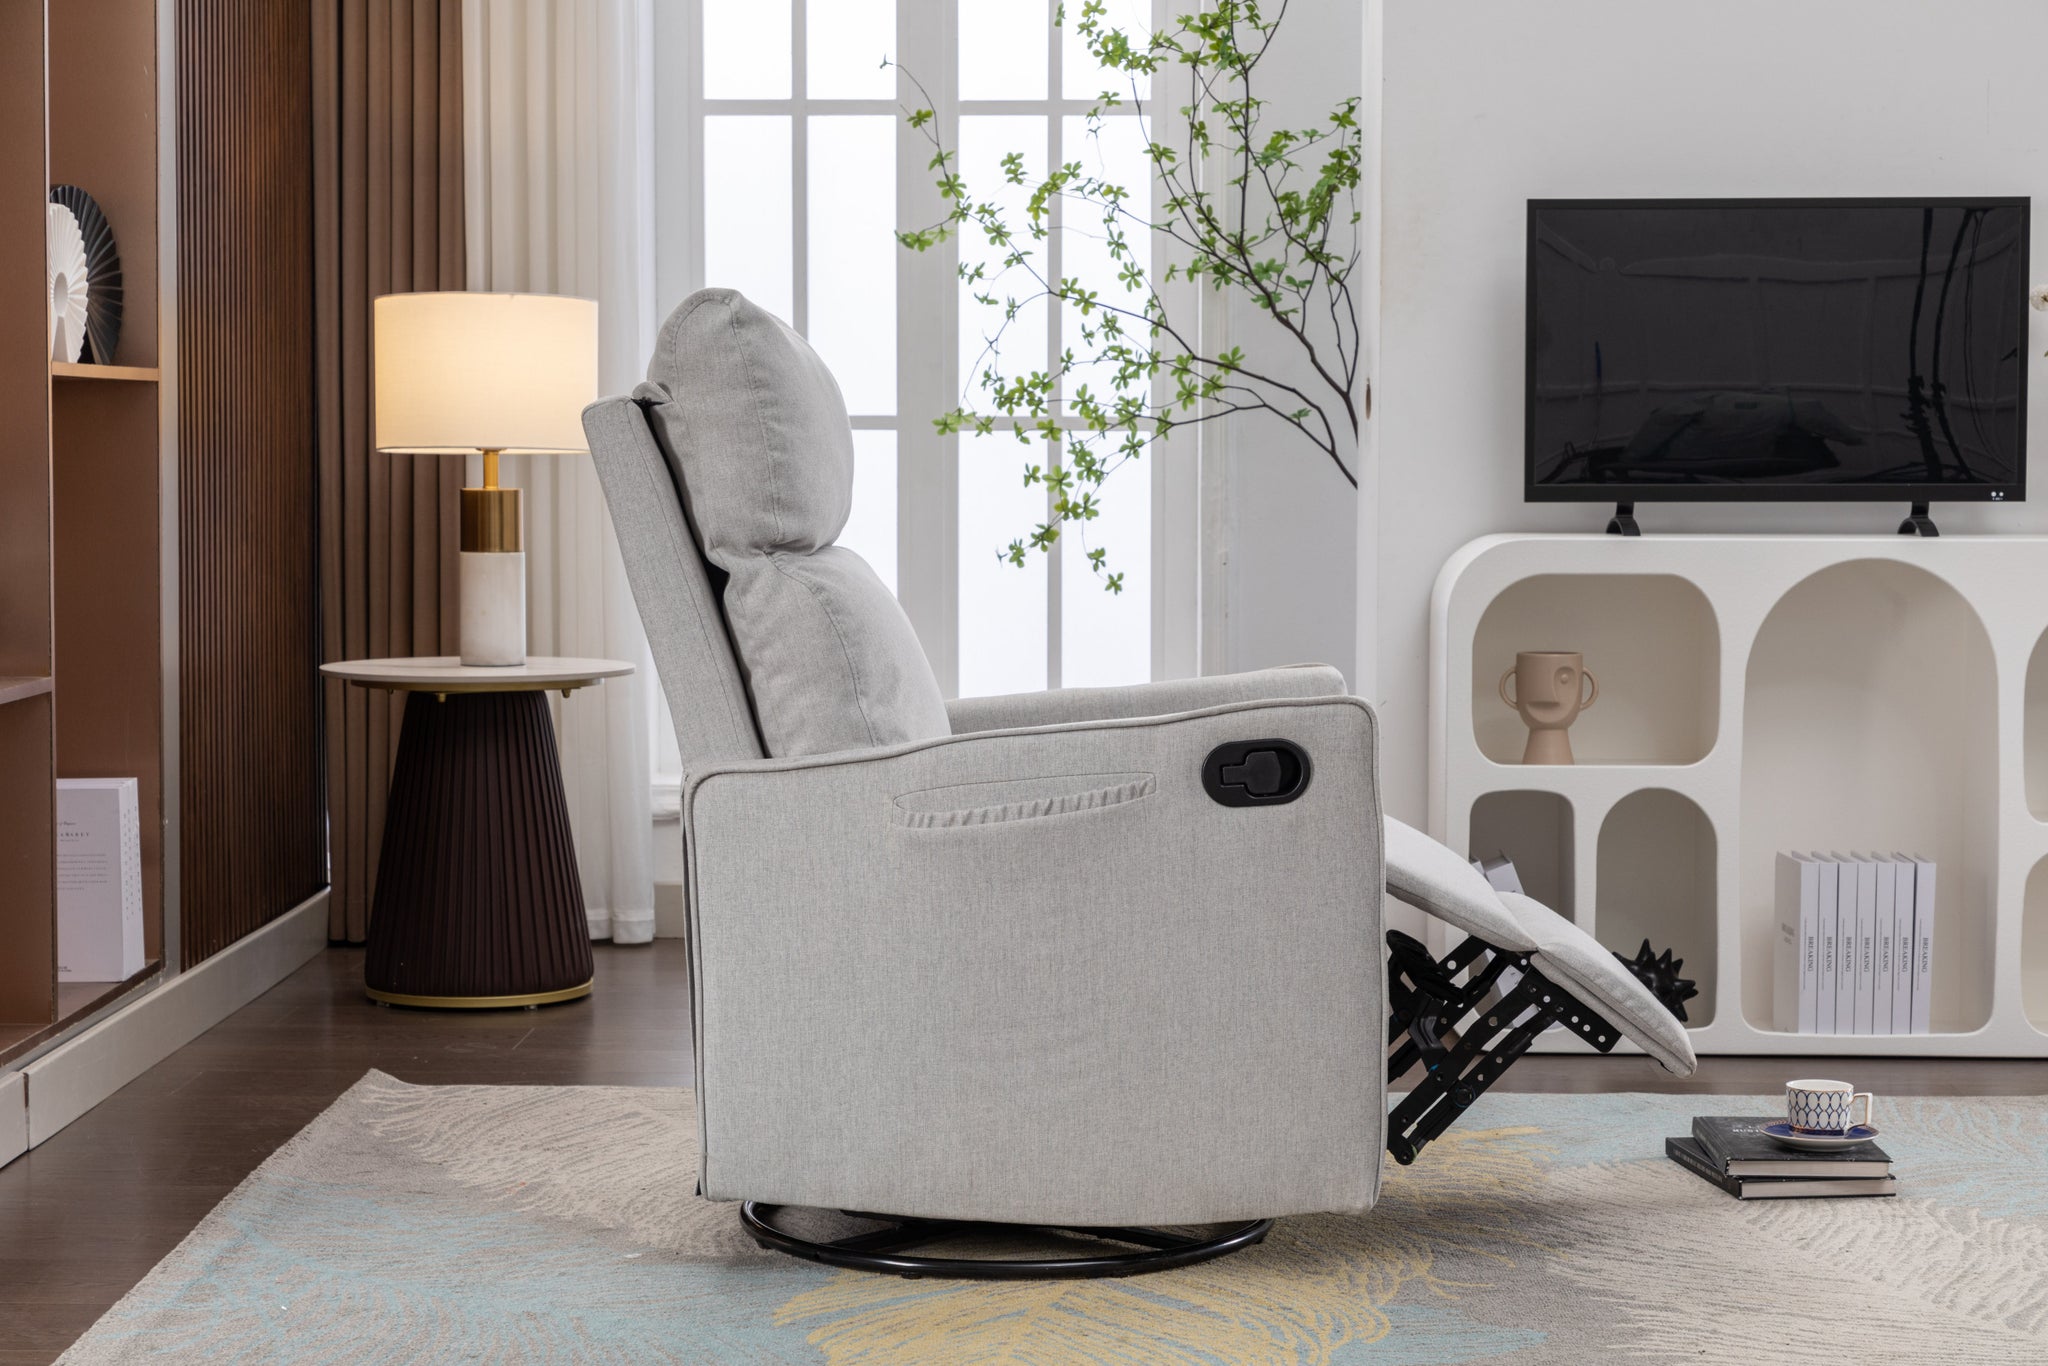 038 Cotton Linen Fabric Swivel Rocking Chair Glider light gray-cotton-manual-handle-metal-primary